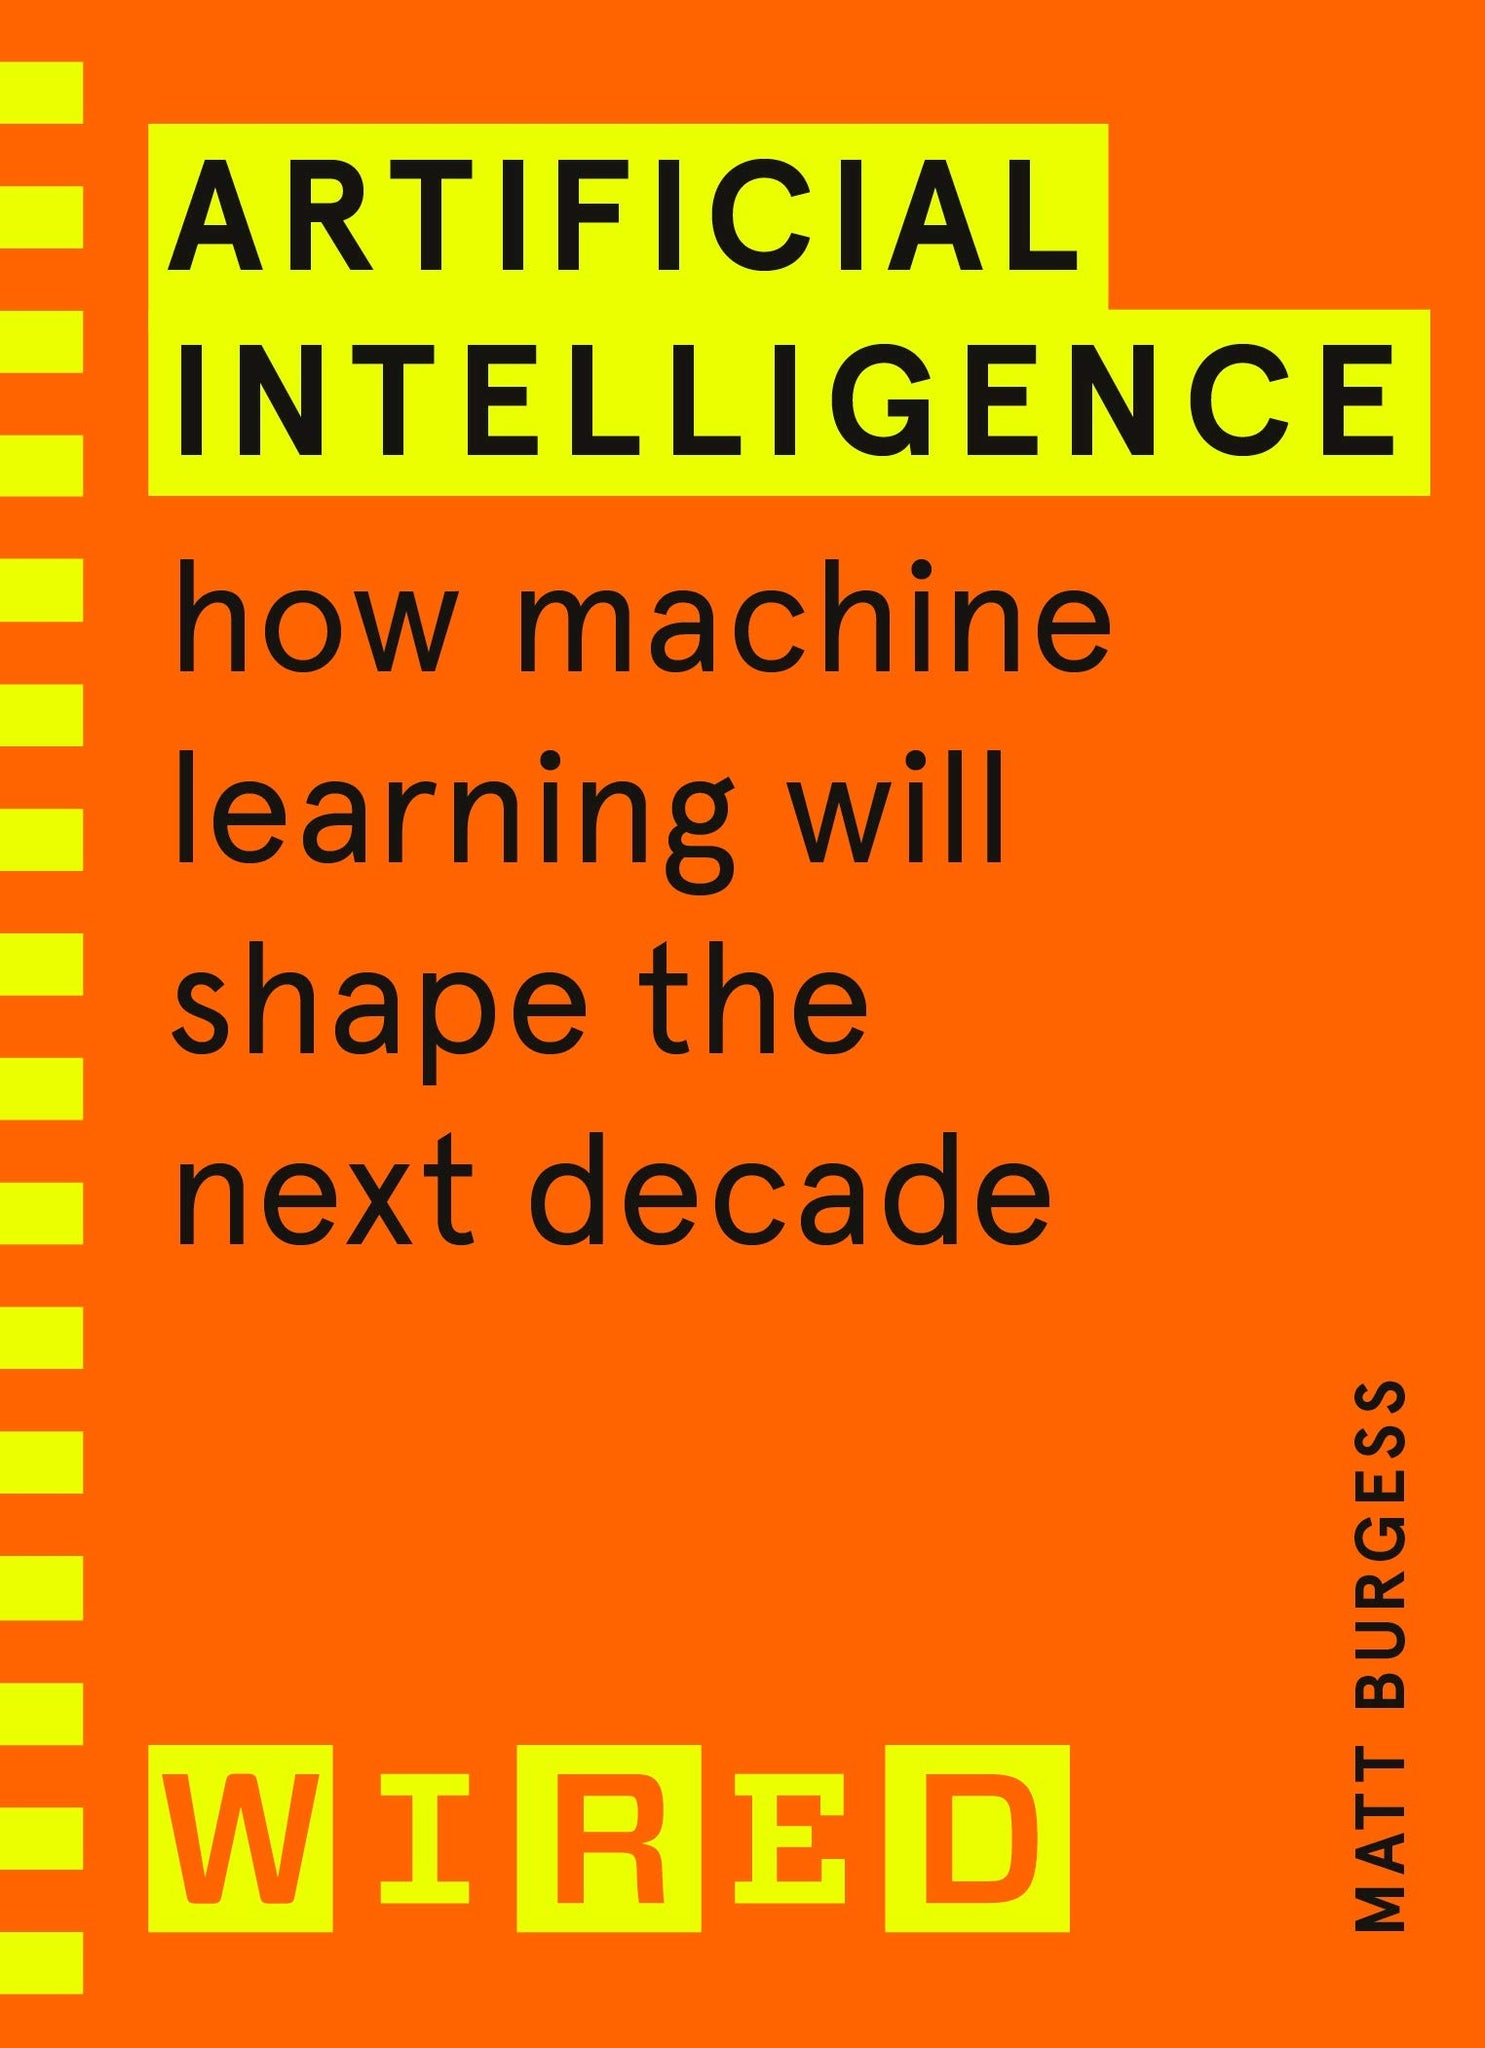 Artificial Intelligence (WIRED guides): How Machine Learning Will Shape the Next Decade - Paperback